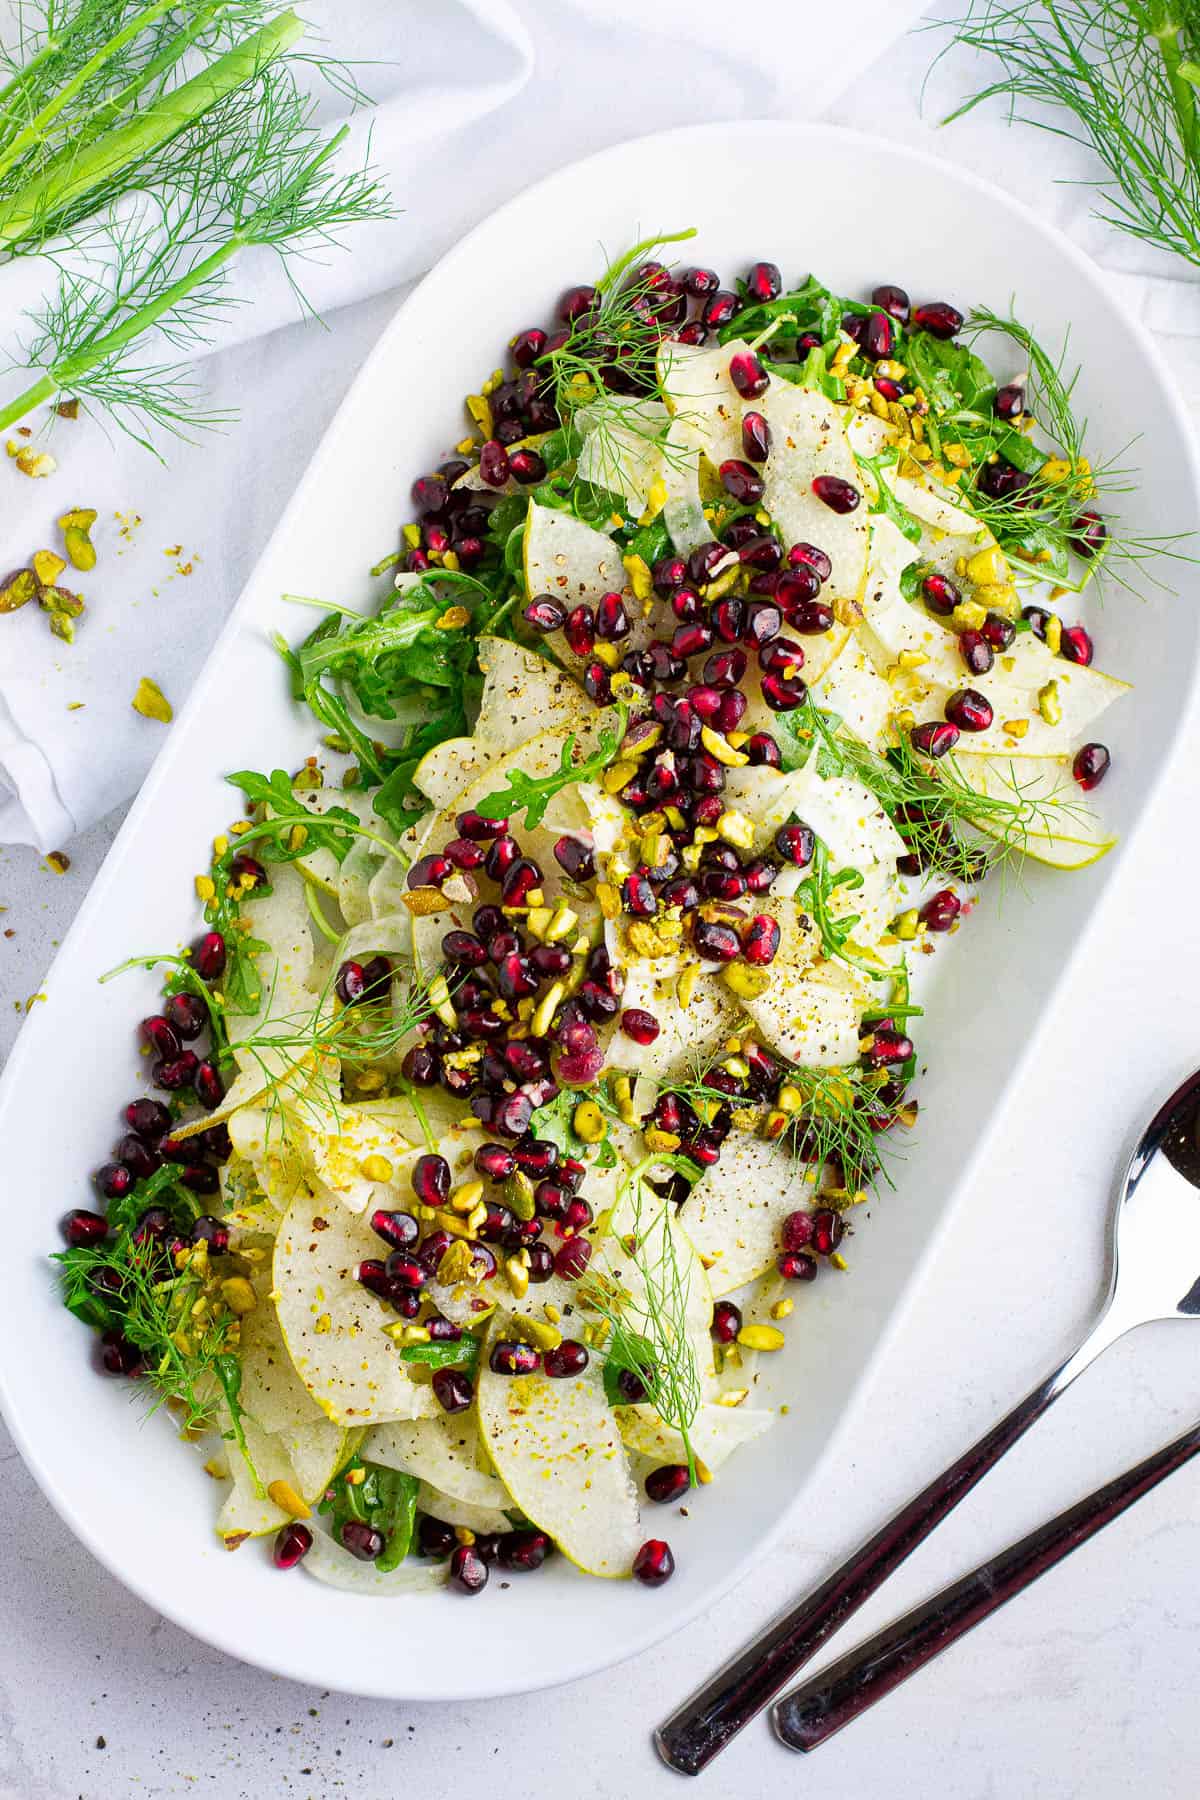 Top view of Asian pear and fennel salad.